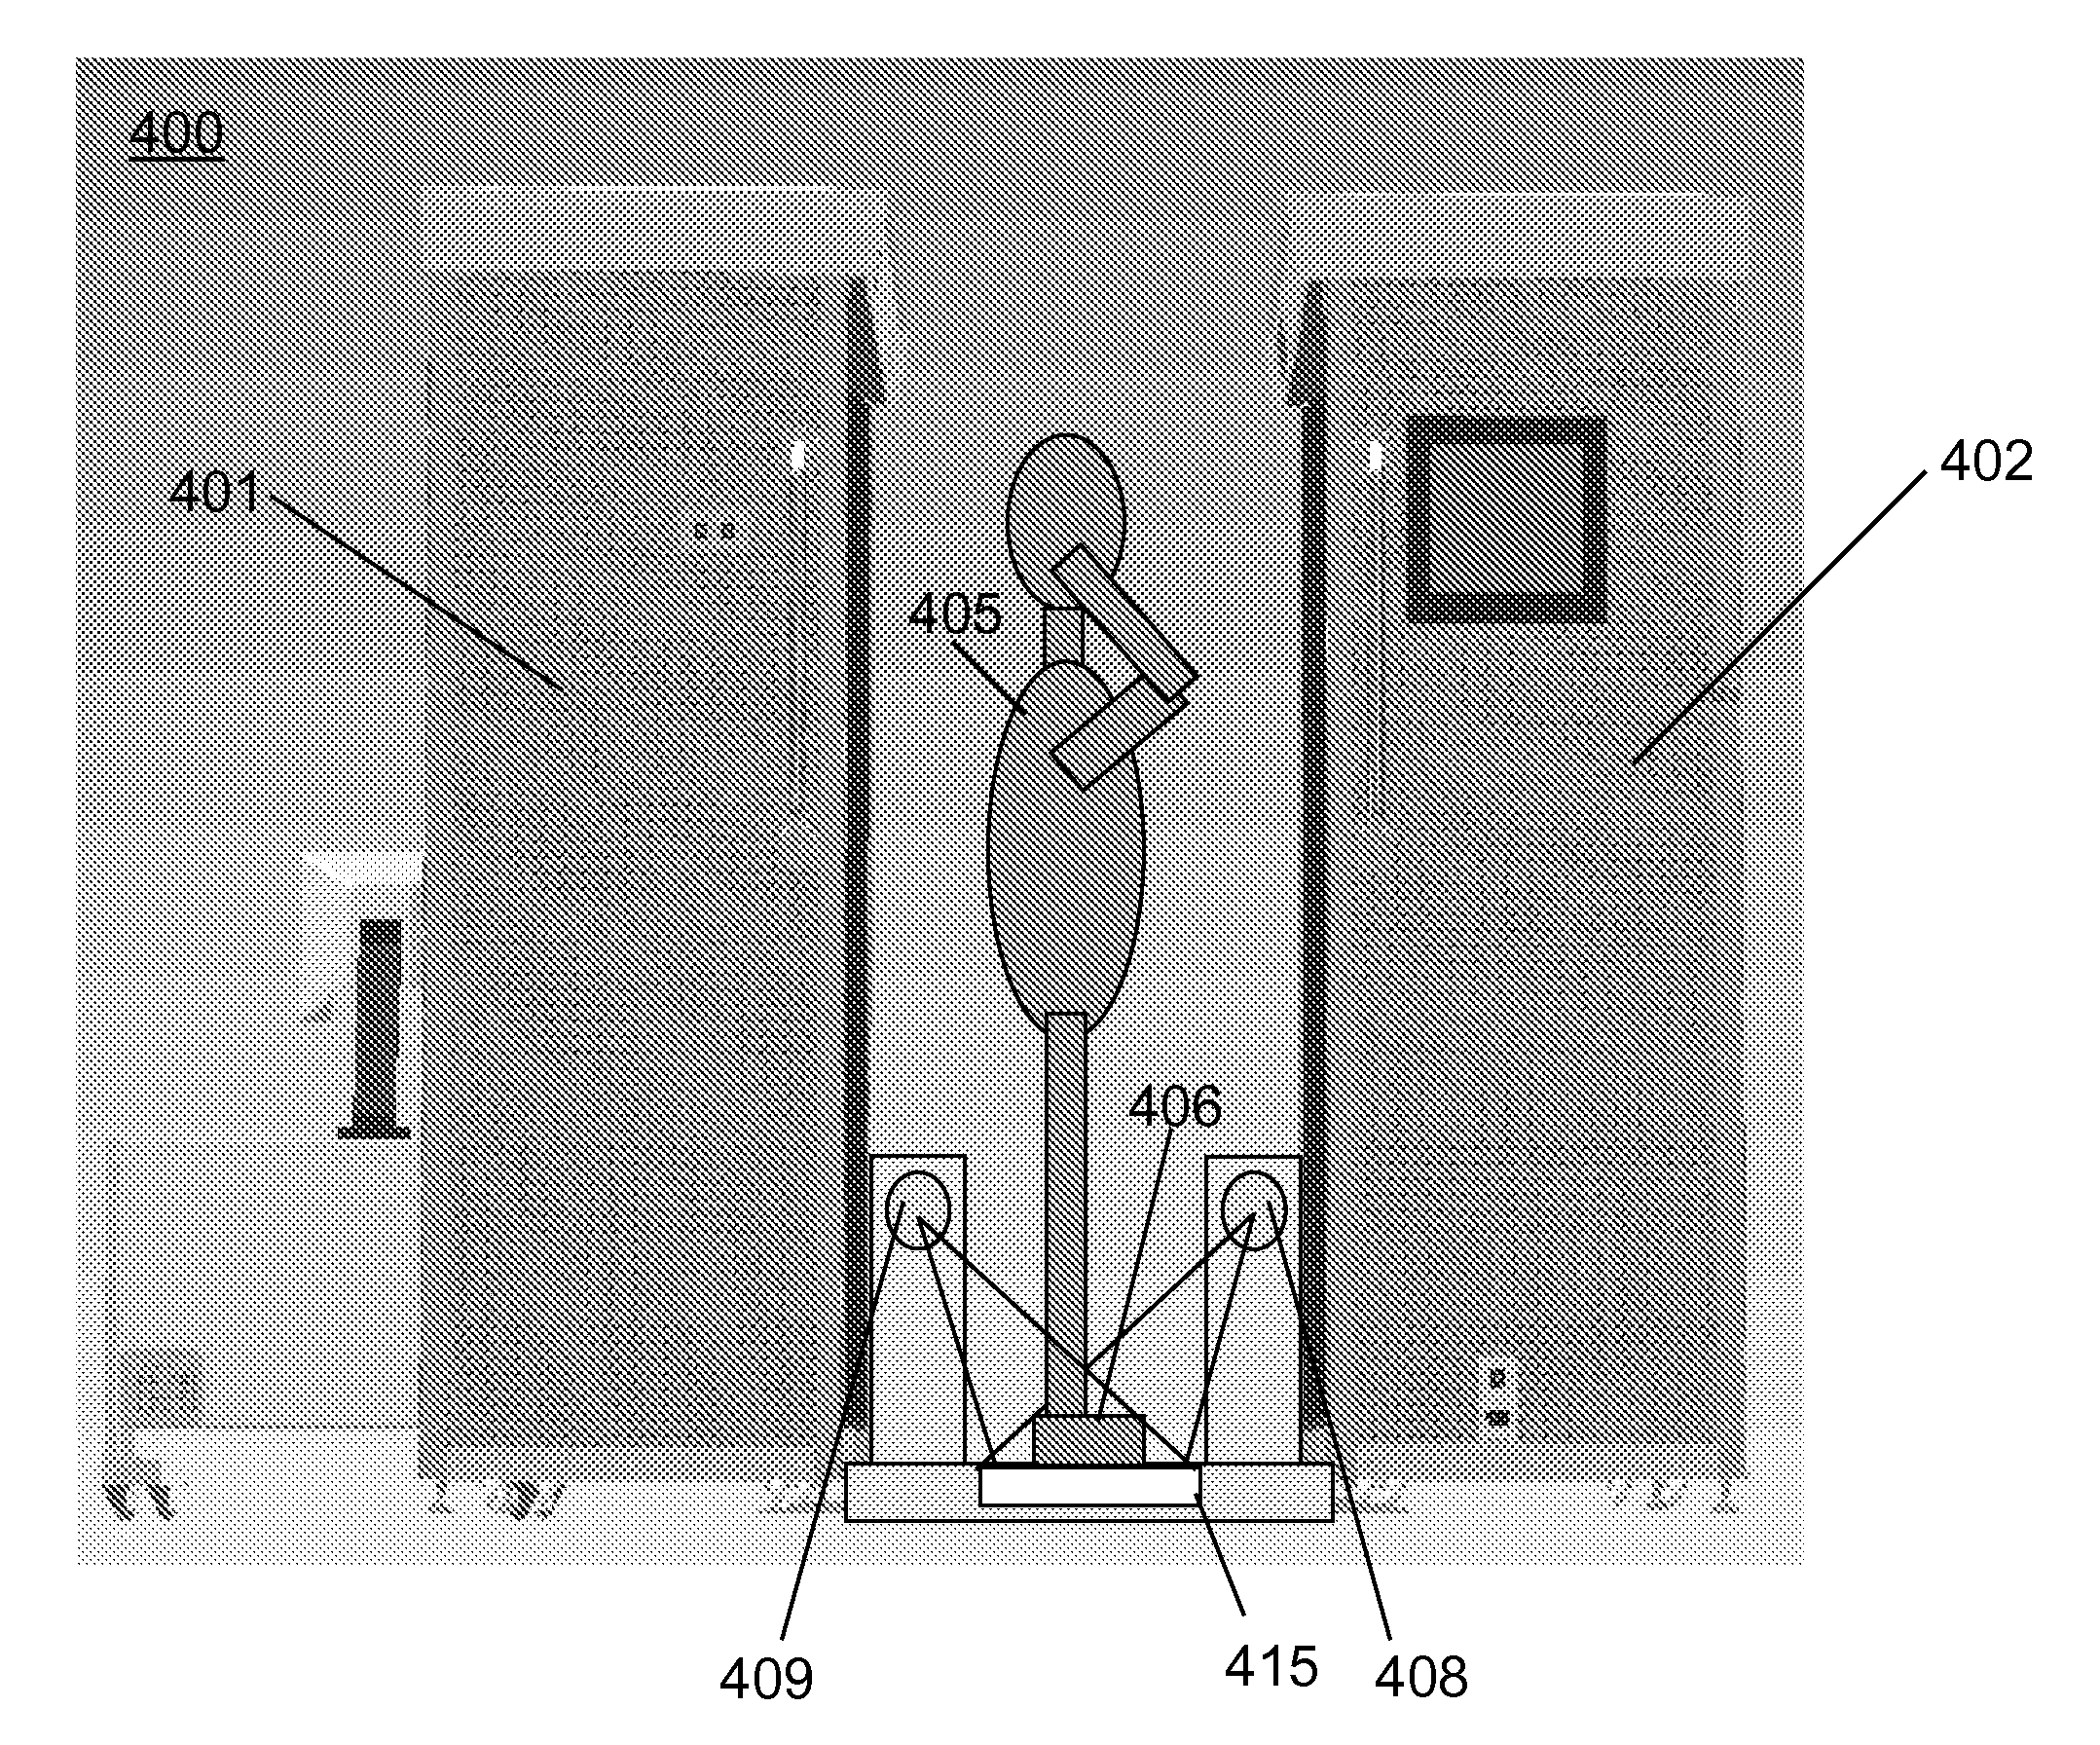 X-Ray-Based System and Methods for Inspecting a Person's Shoes for Aviation Security Threats